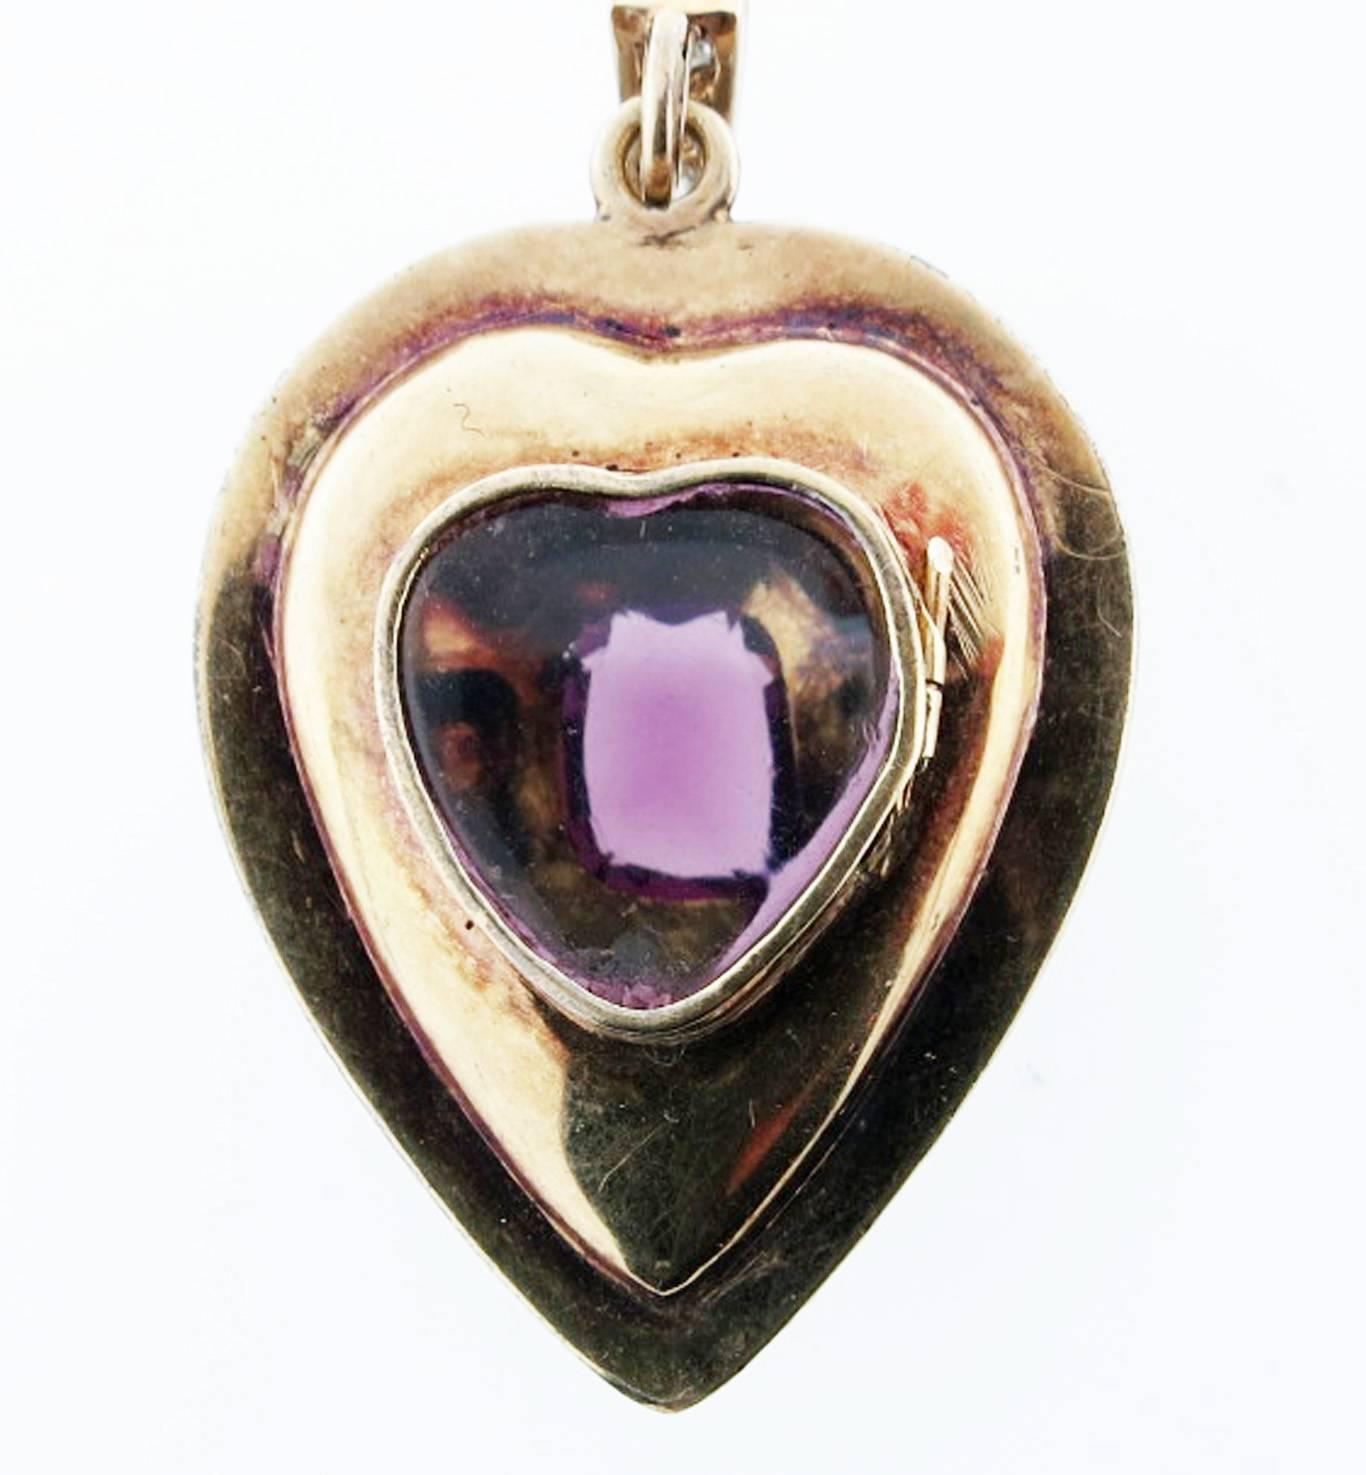 Romantic 18kt. and silver top locket dating from mid 19th century made in France.The top is set in silver with a garnet center and surrounded with rose cut diamonds accented with green enamel detail measuring 1 1/2 inches .
The locket is all